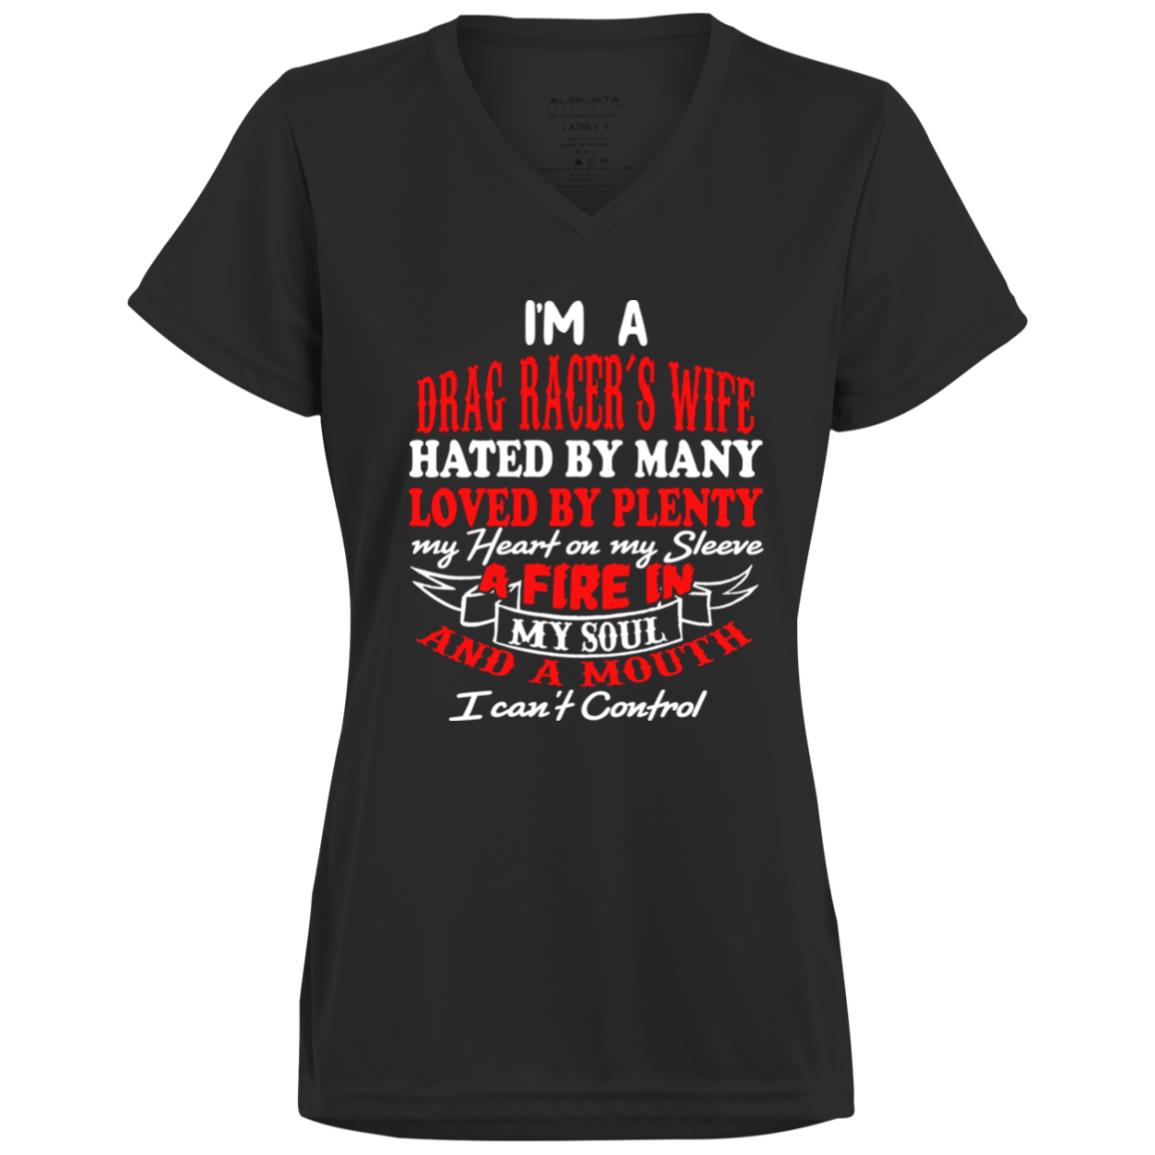 I'm A Drag Racer's Wife Hated By Many Loved By Plenty Ladies’ Moisture-Wicking V-Neck Tee